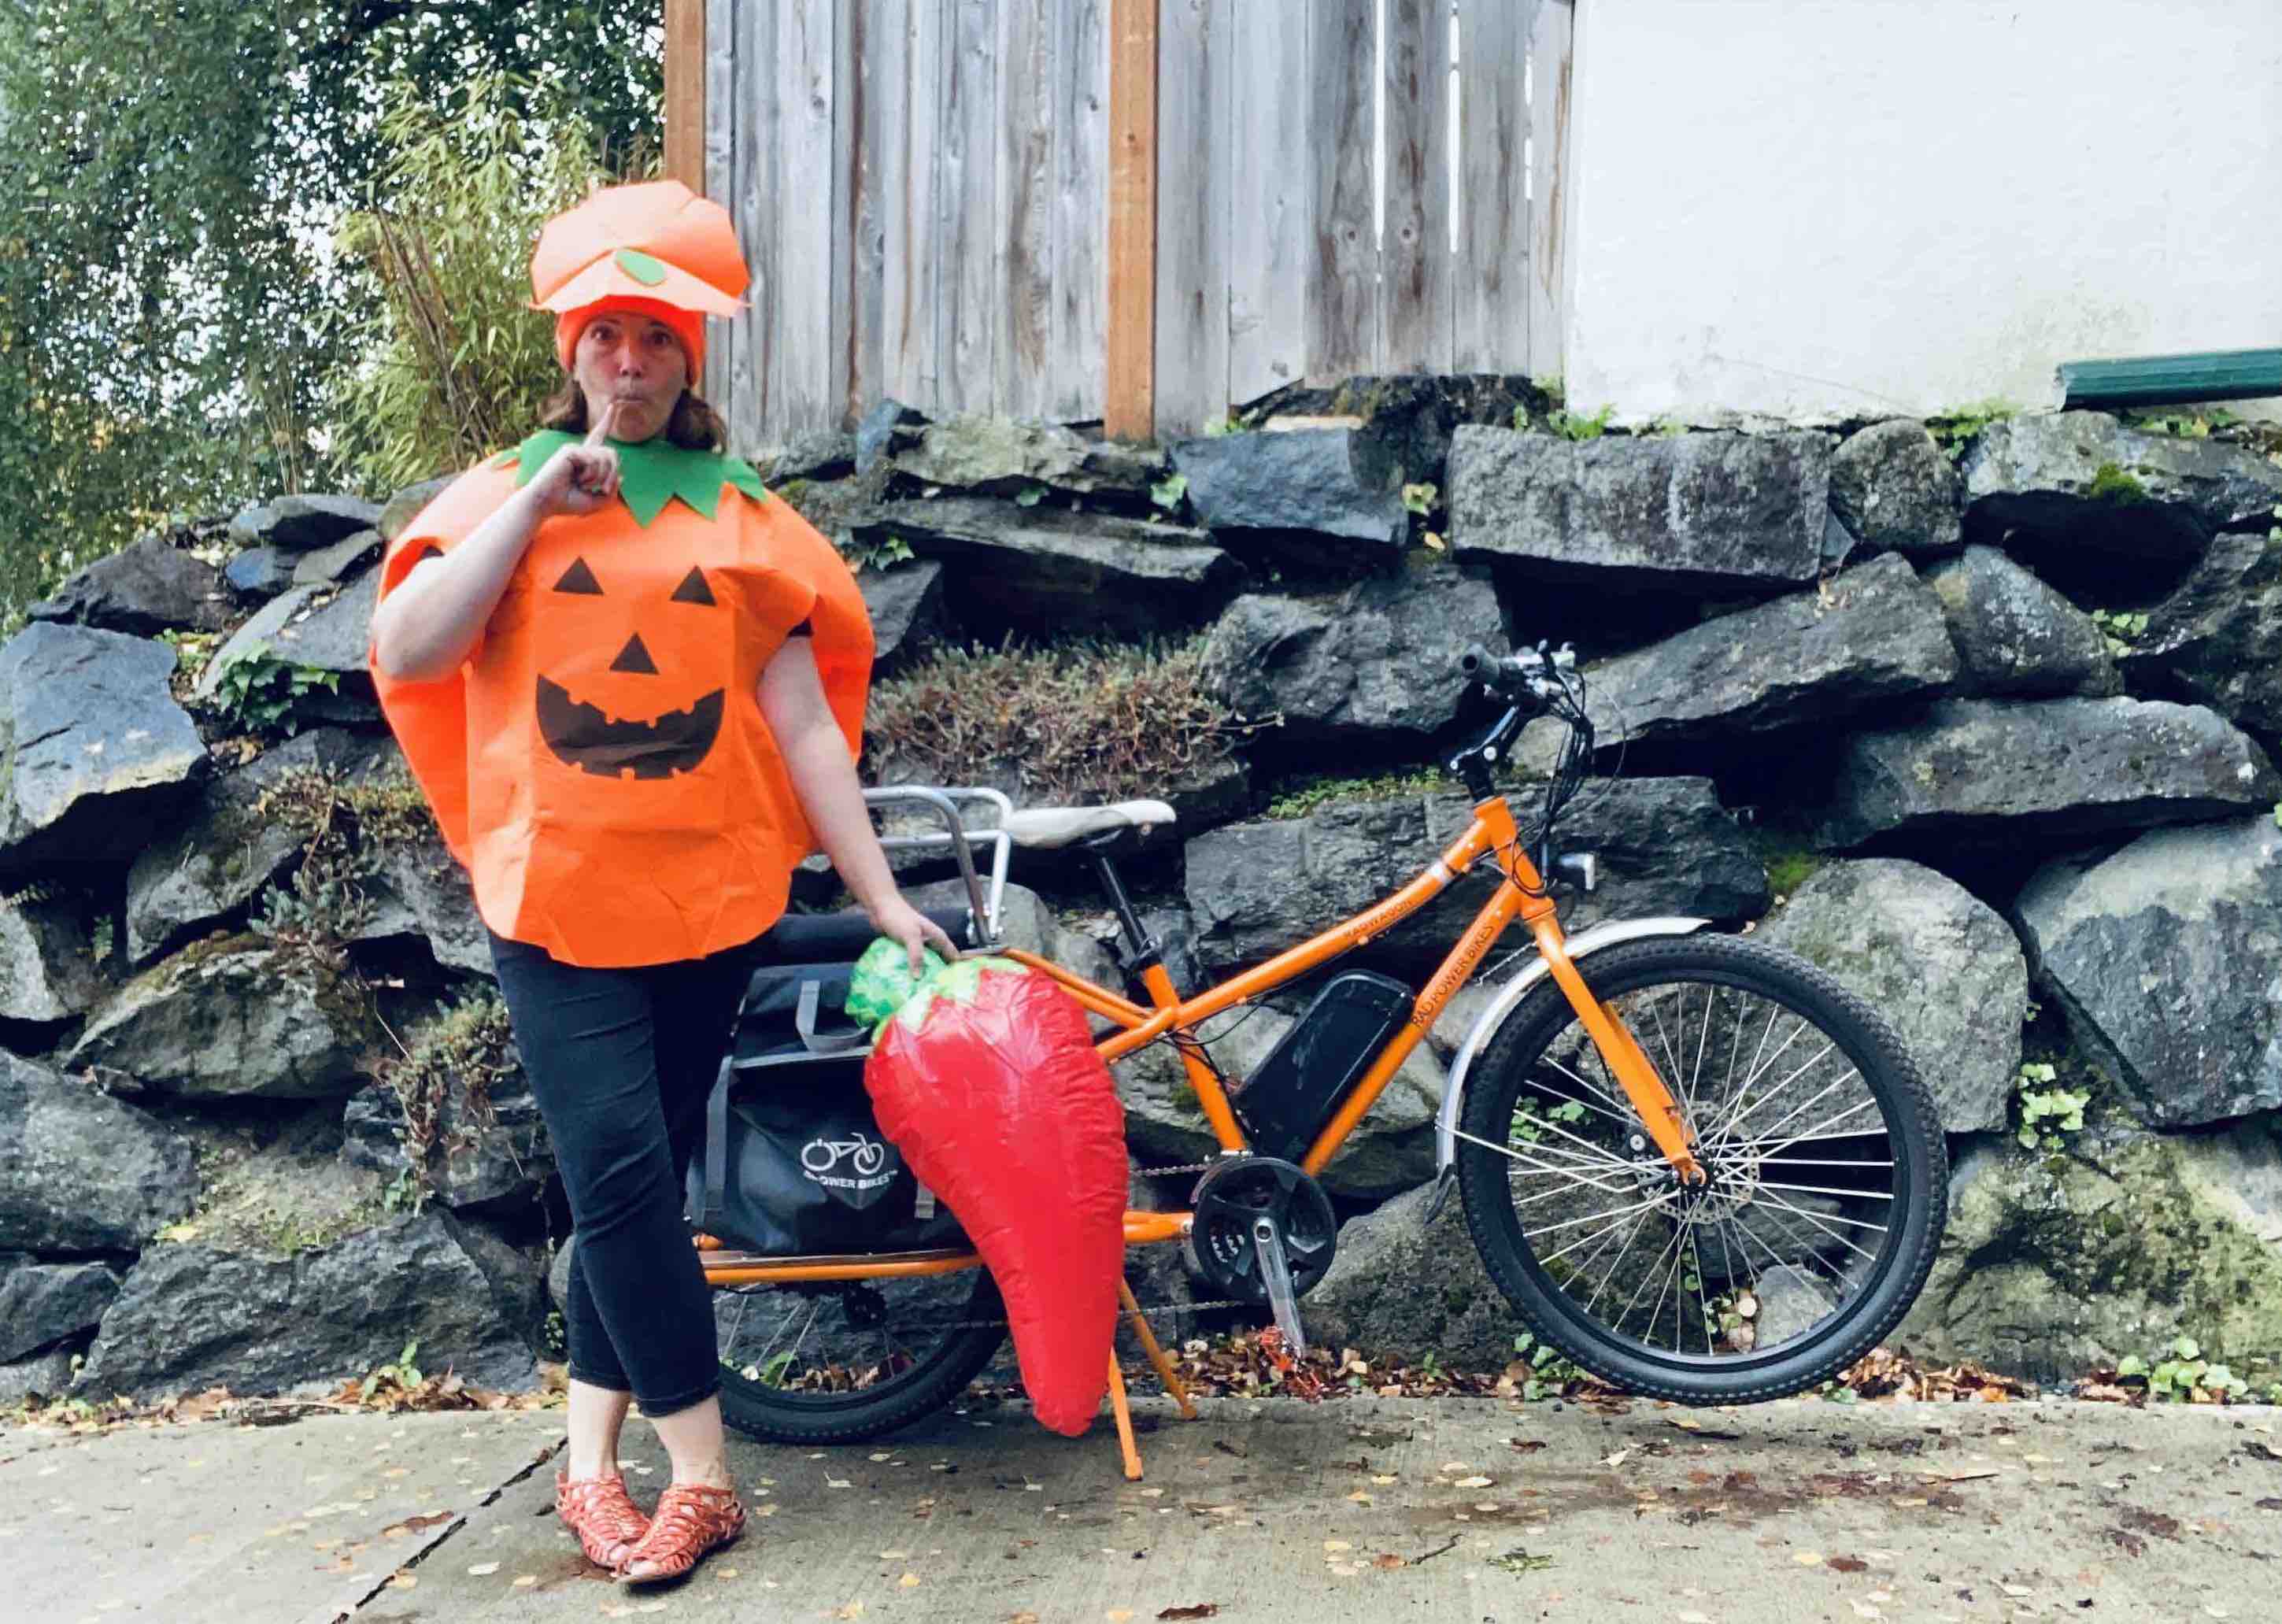 A woman dressed in a Halloween costume stands next to her RadWagon electric metro bike.